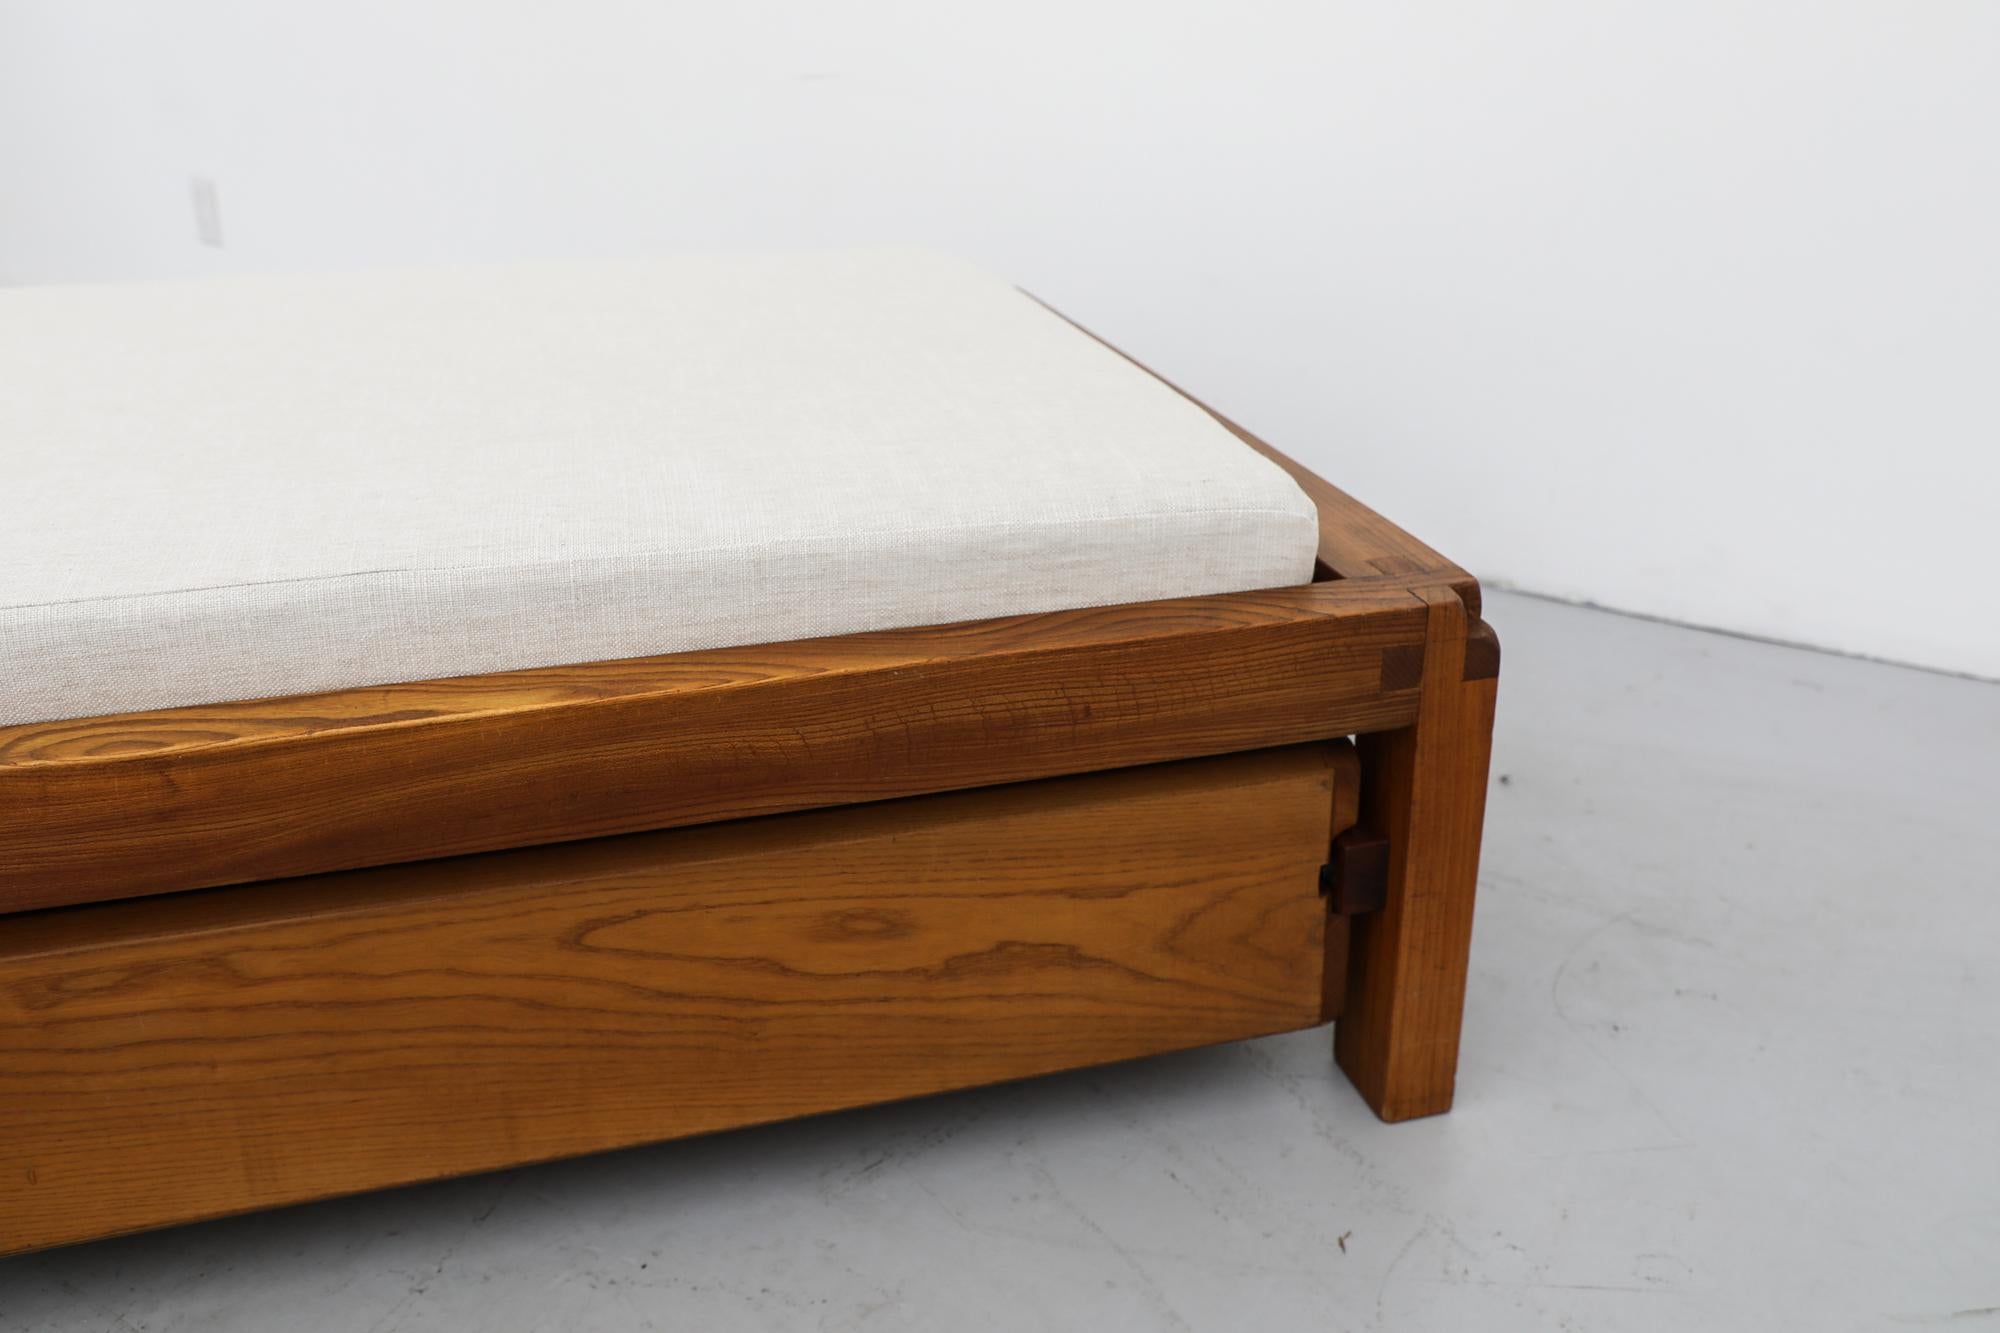 Pierre Chapo 'L03' Daybed in Elm with Storage & Newly Made Mattress, 1960s For Sale 8